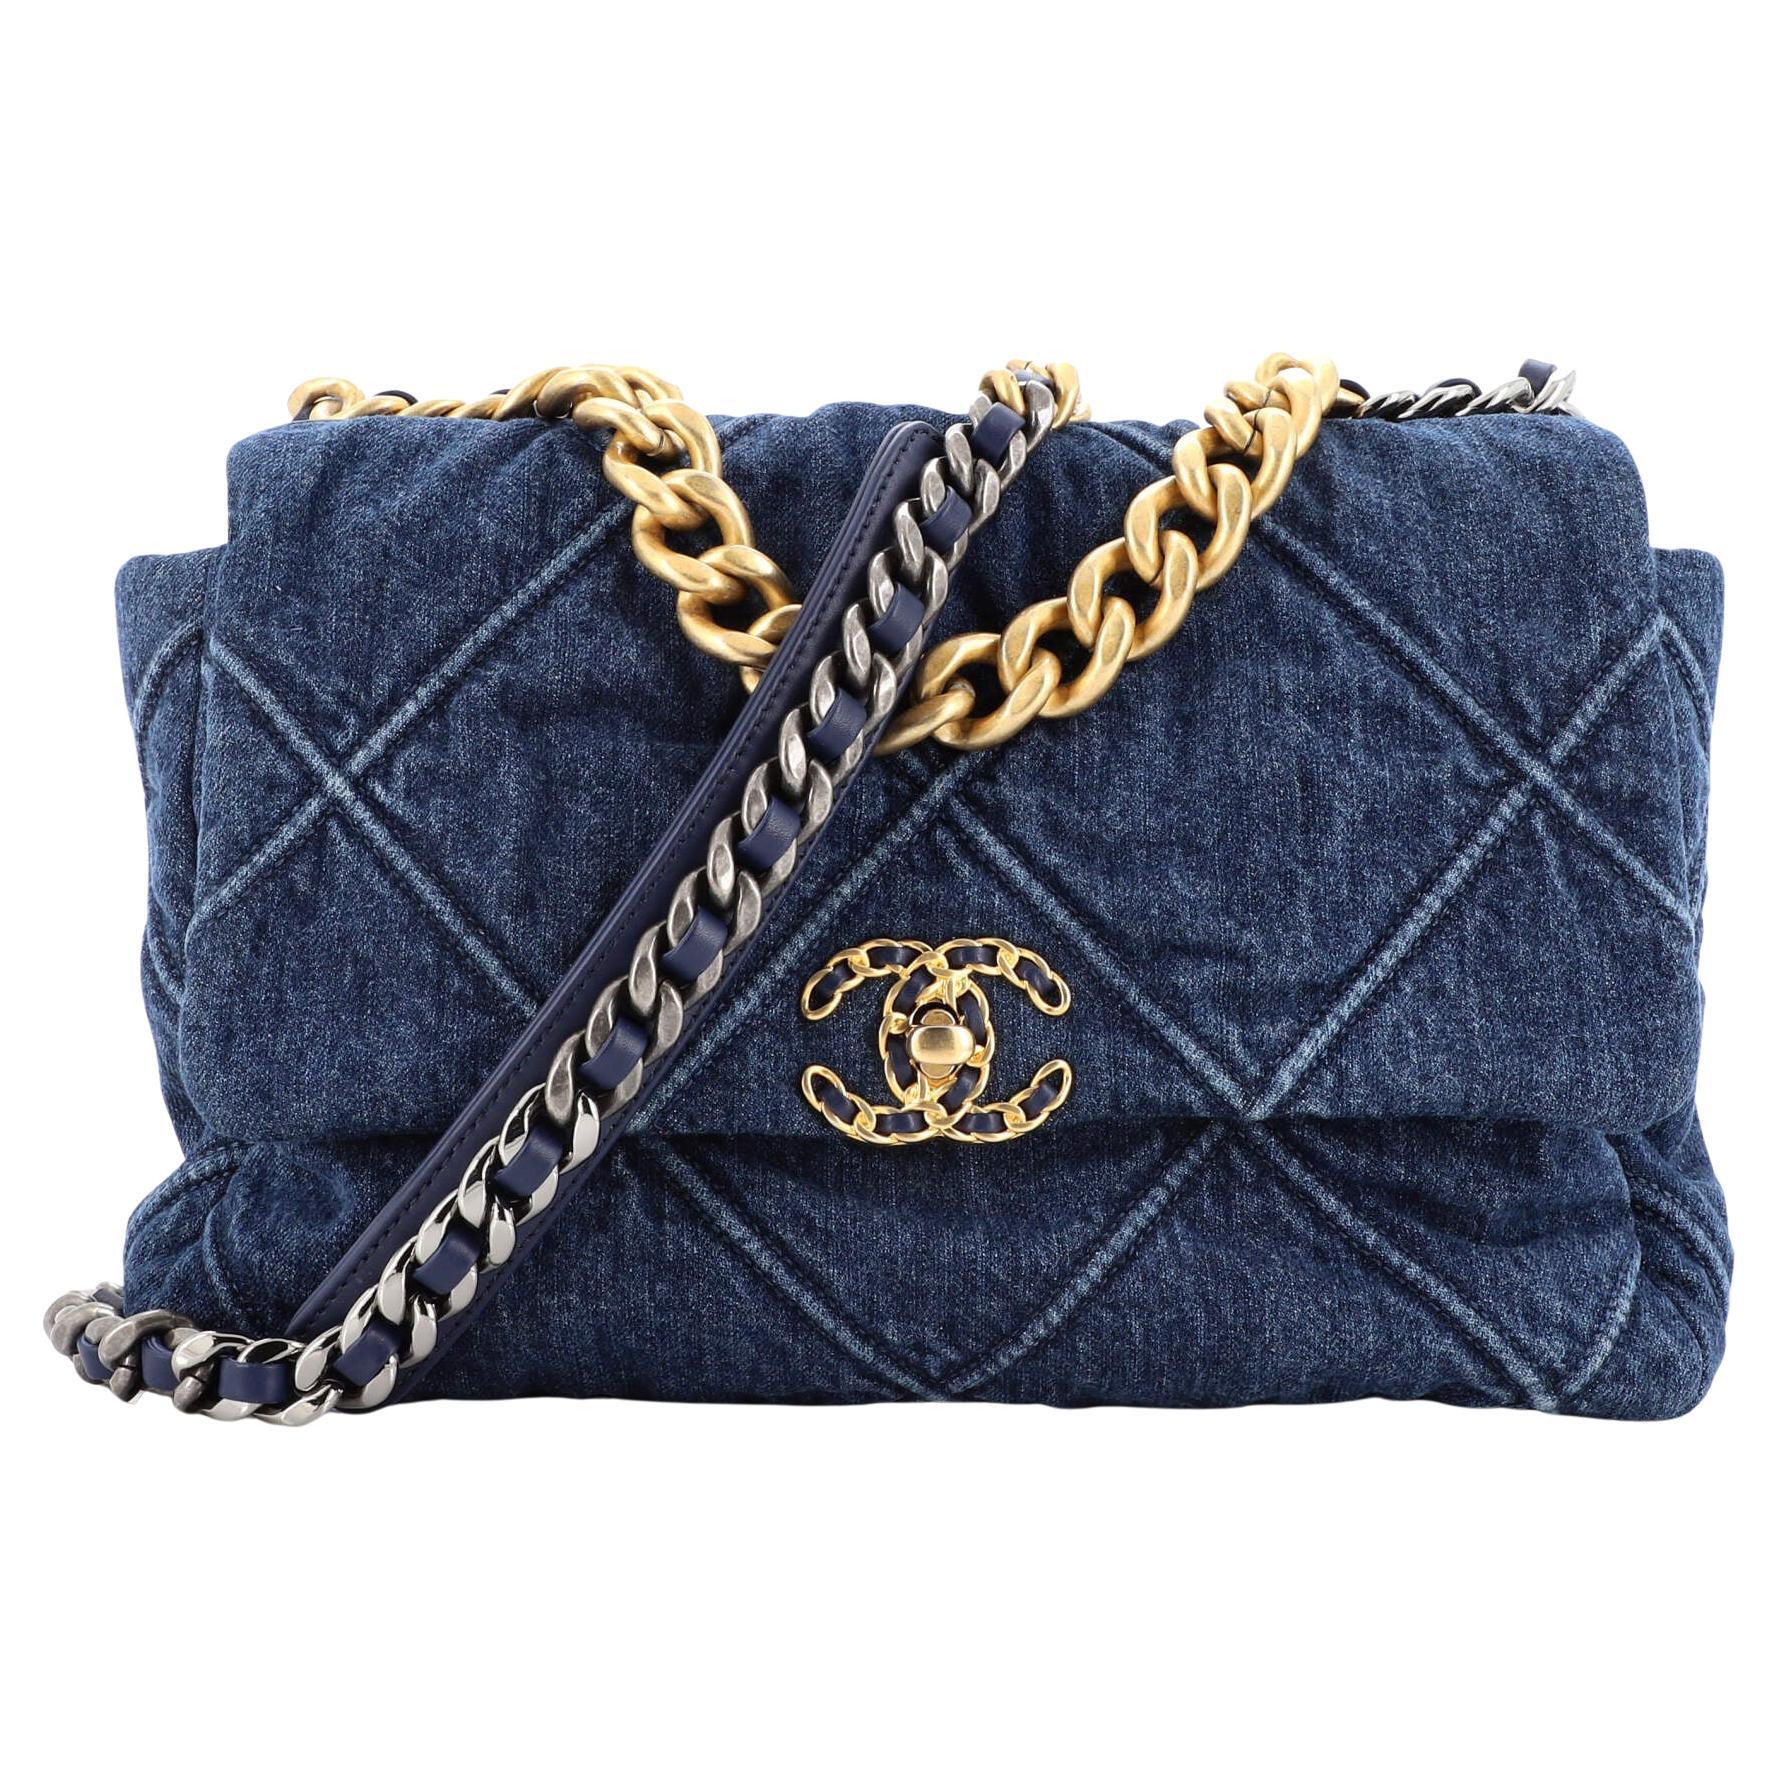 Chanel Blue Denim Chanel 19 Coin Pouch On Chain